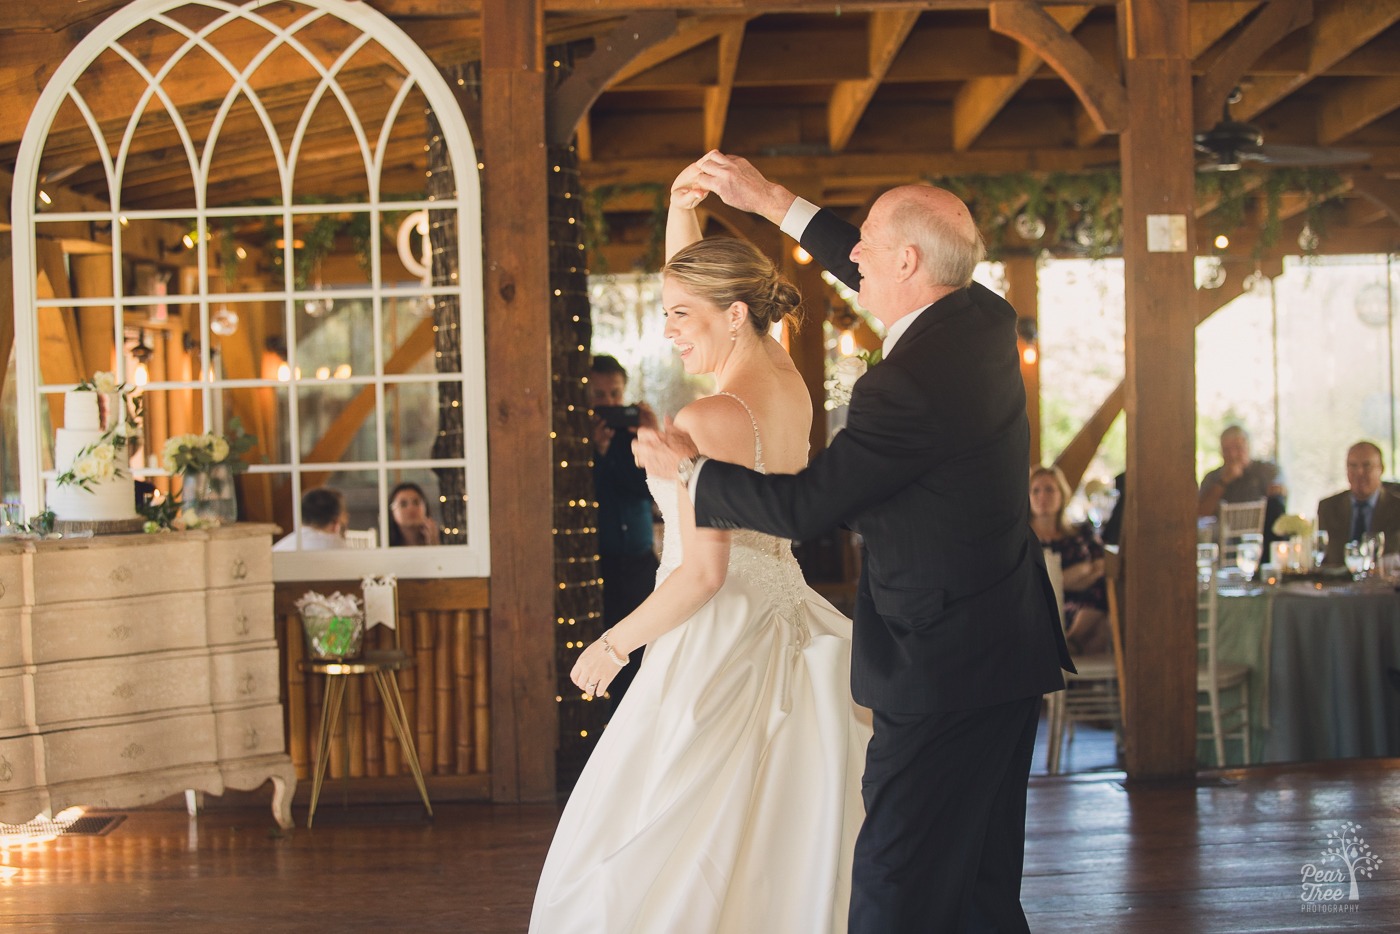 Father of the bride twirling his daughter during their father daughter dance at Rocky's Lake Estate